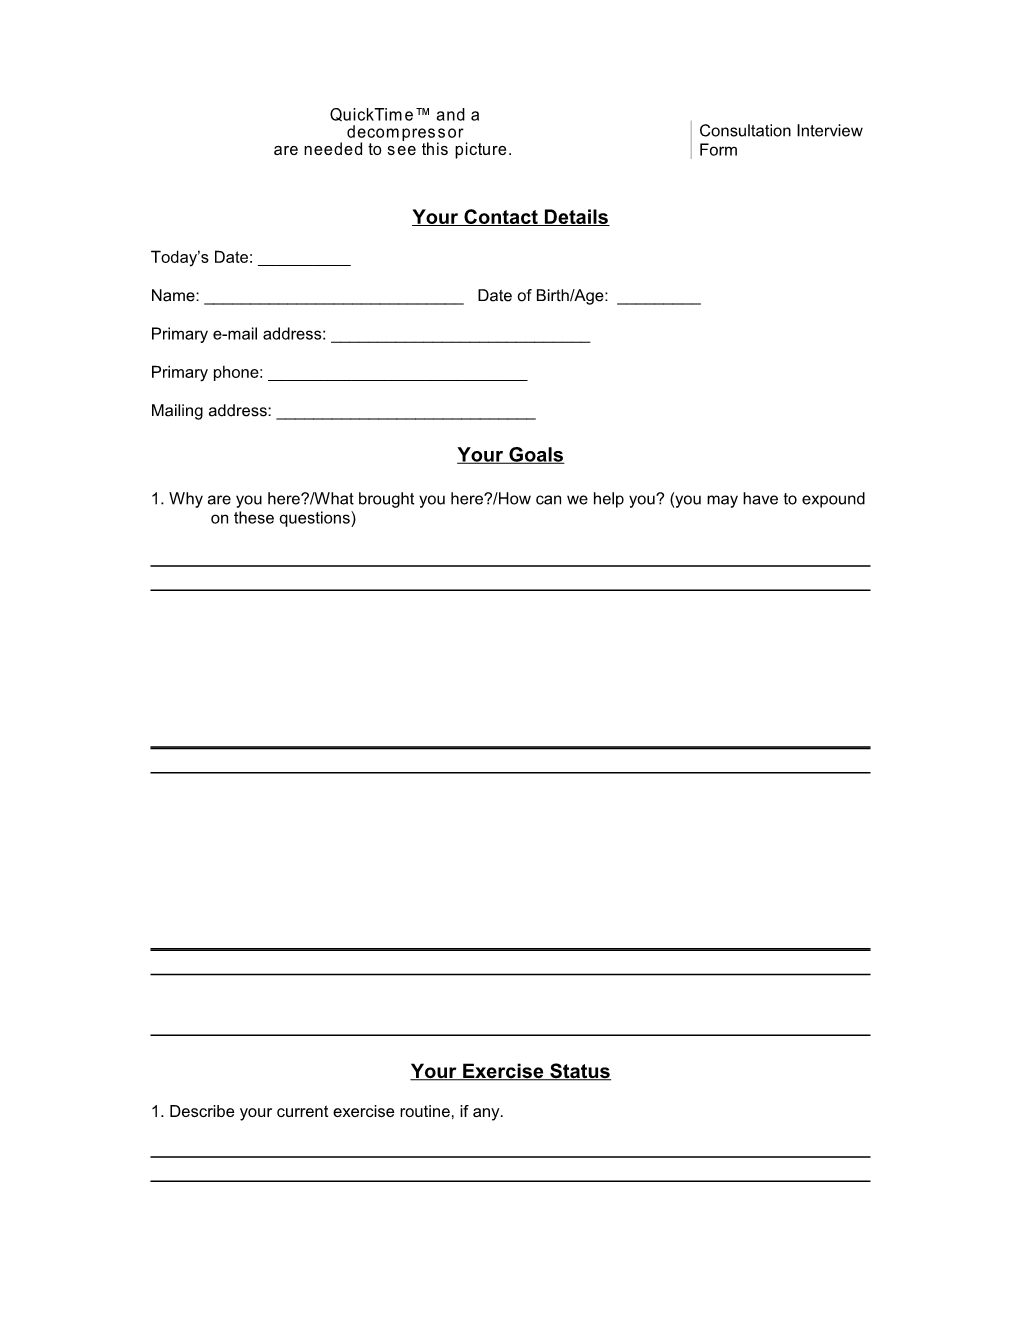 Consultation Interview Form